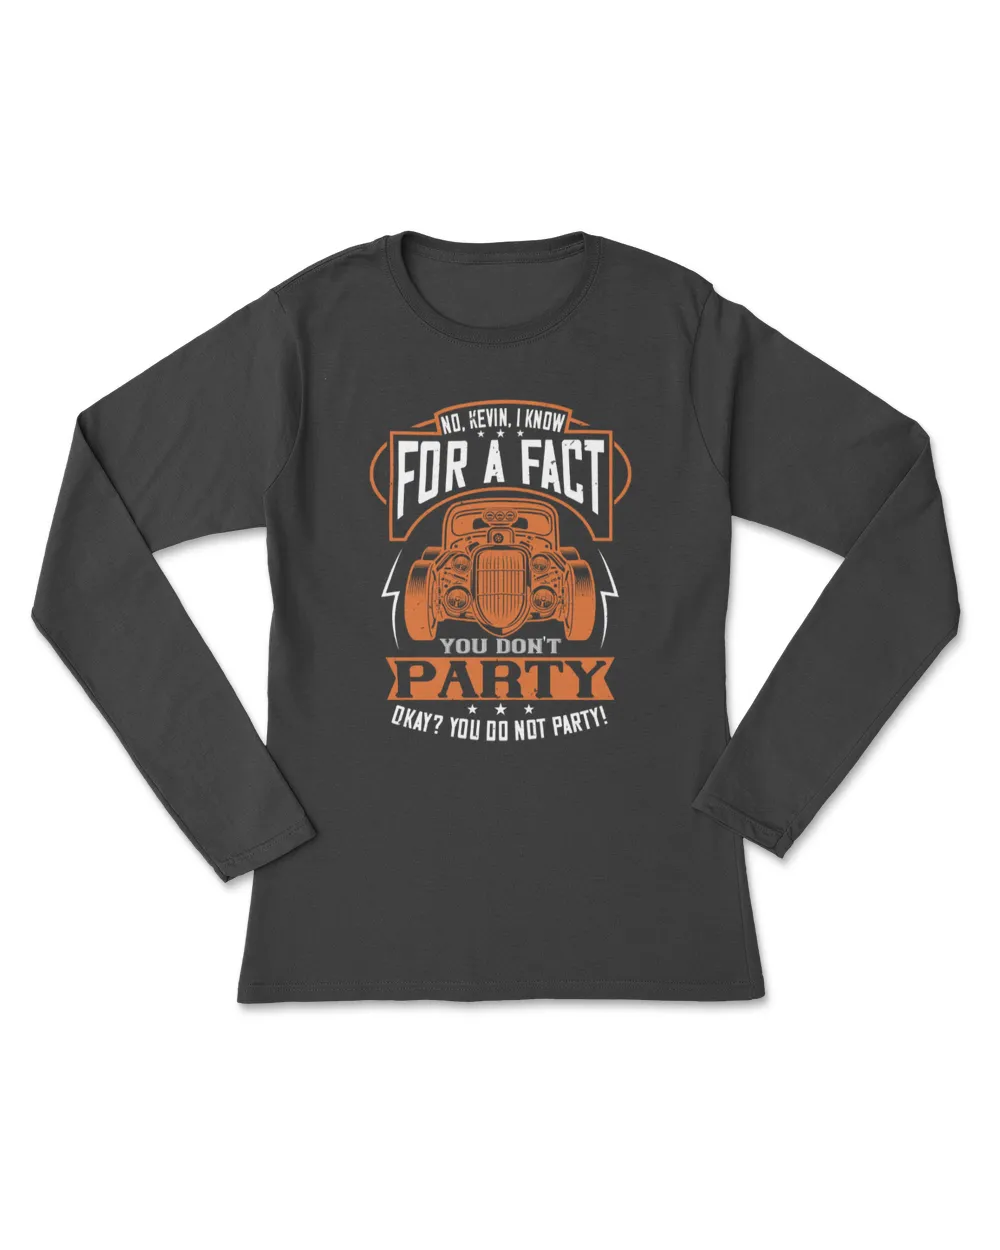 No Kevin I Know For A Fact You Don't Party Hot Rod T-Shirt